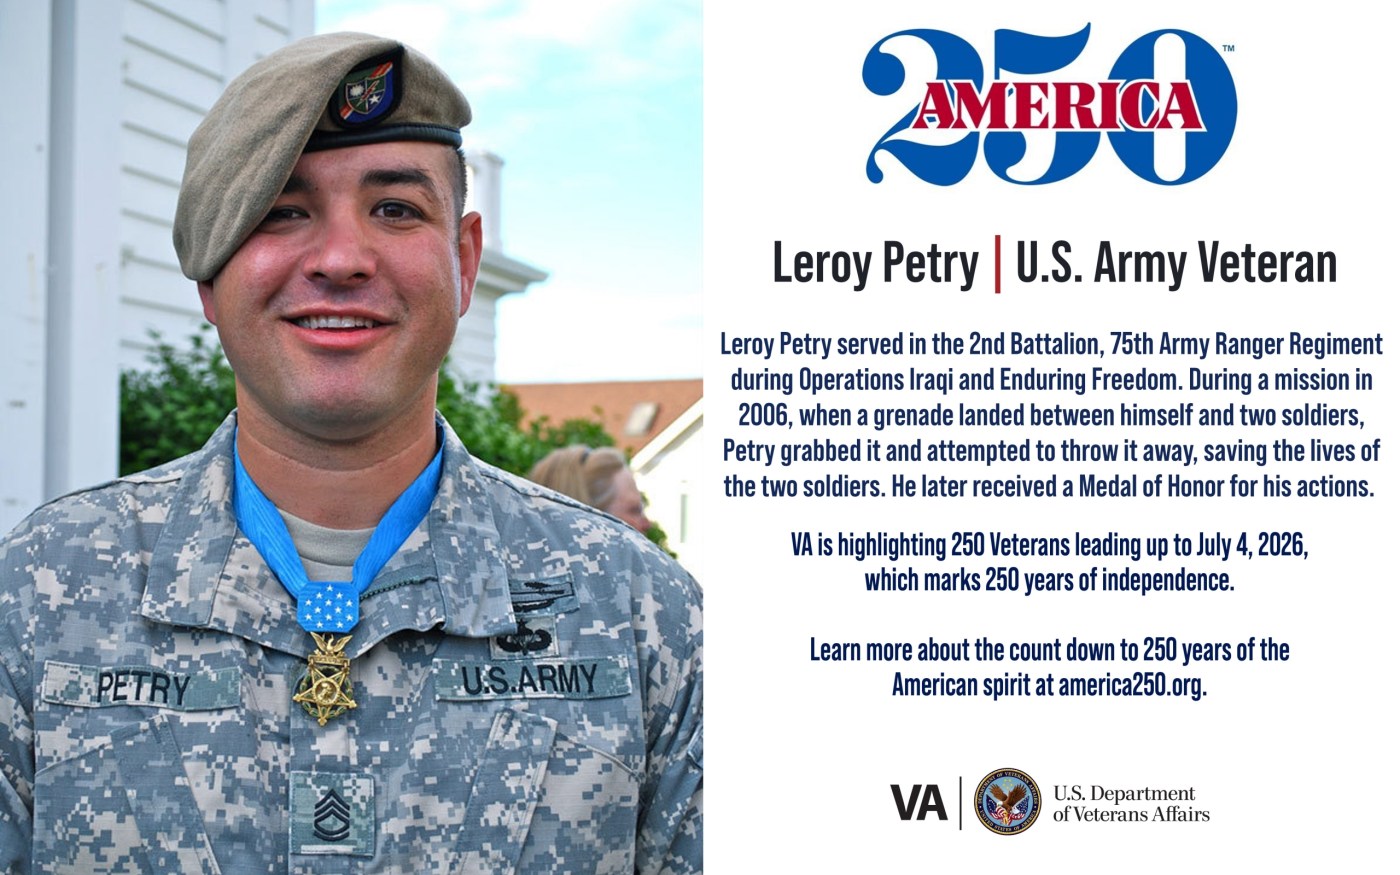 This week’s America250 salute is Army Veteran Leroy Petry, who received a Medal of Honor for protecting teammates from a grenade explosion.